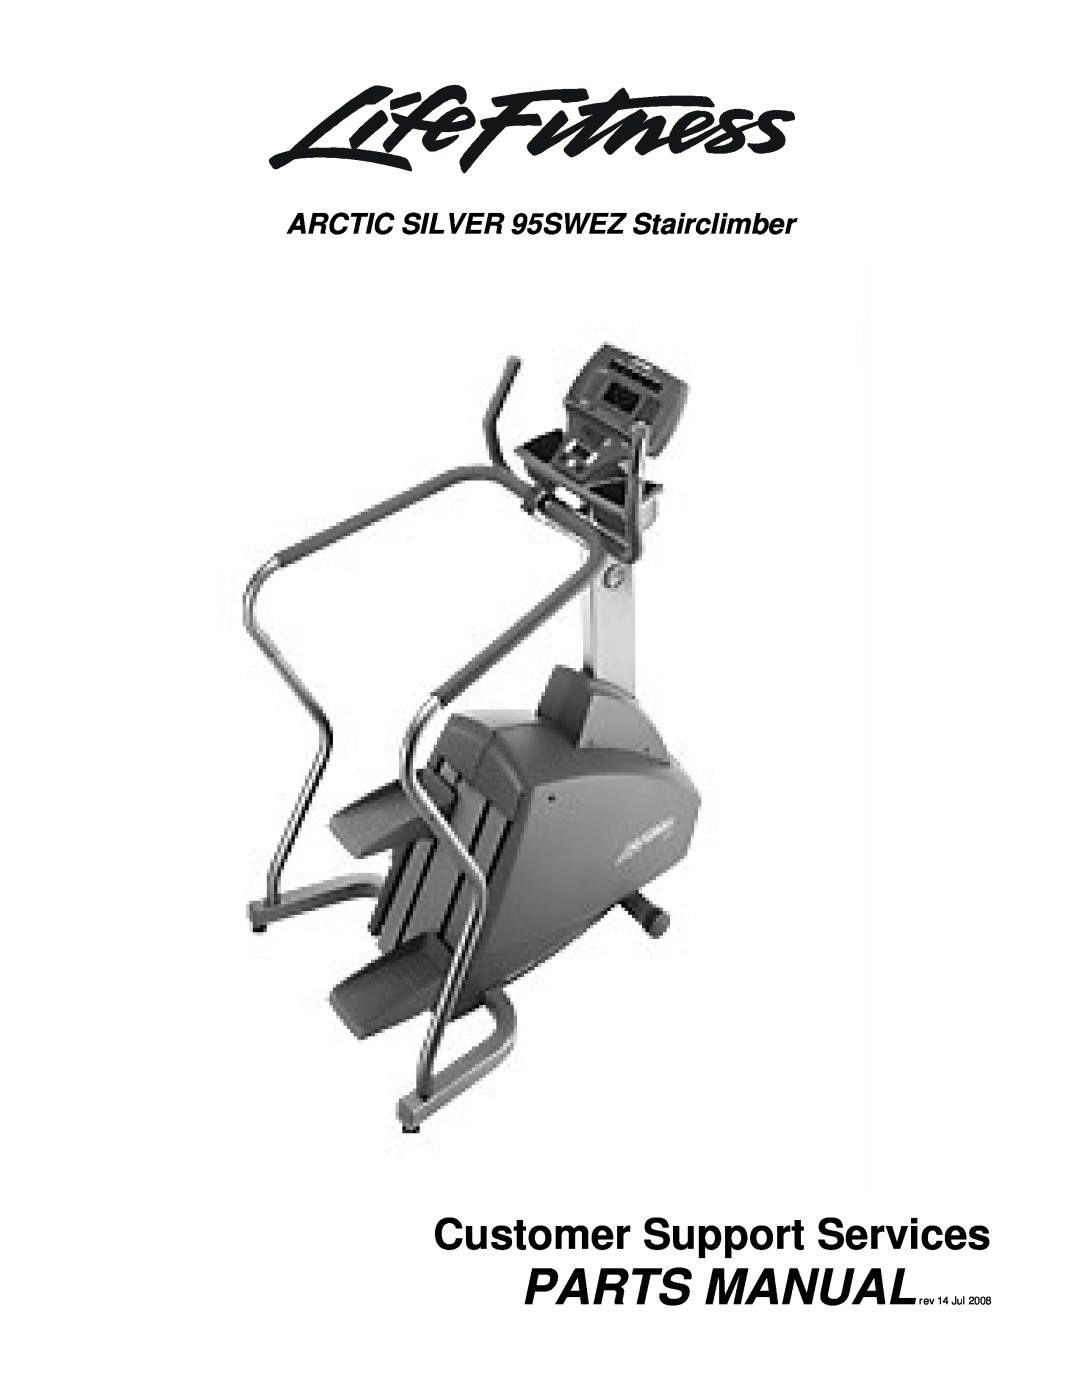 Life Fitness manual ARCTIC SILVER 95SWEZ Stairclimber, Customer Support Services, PARTS MANUALrev 14 Jul 